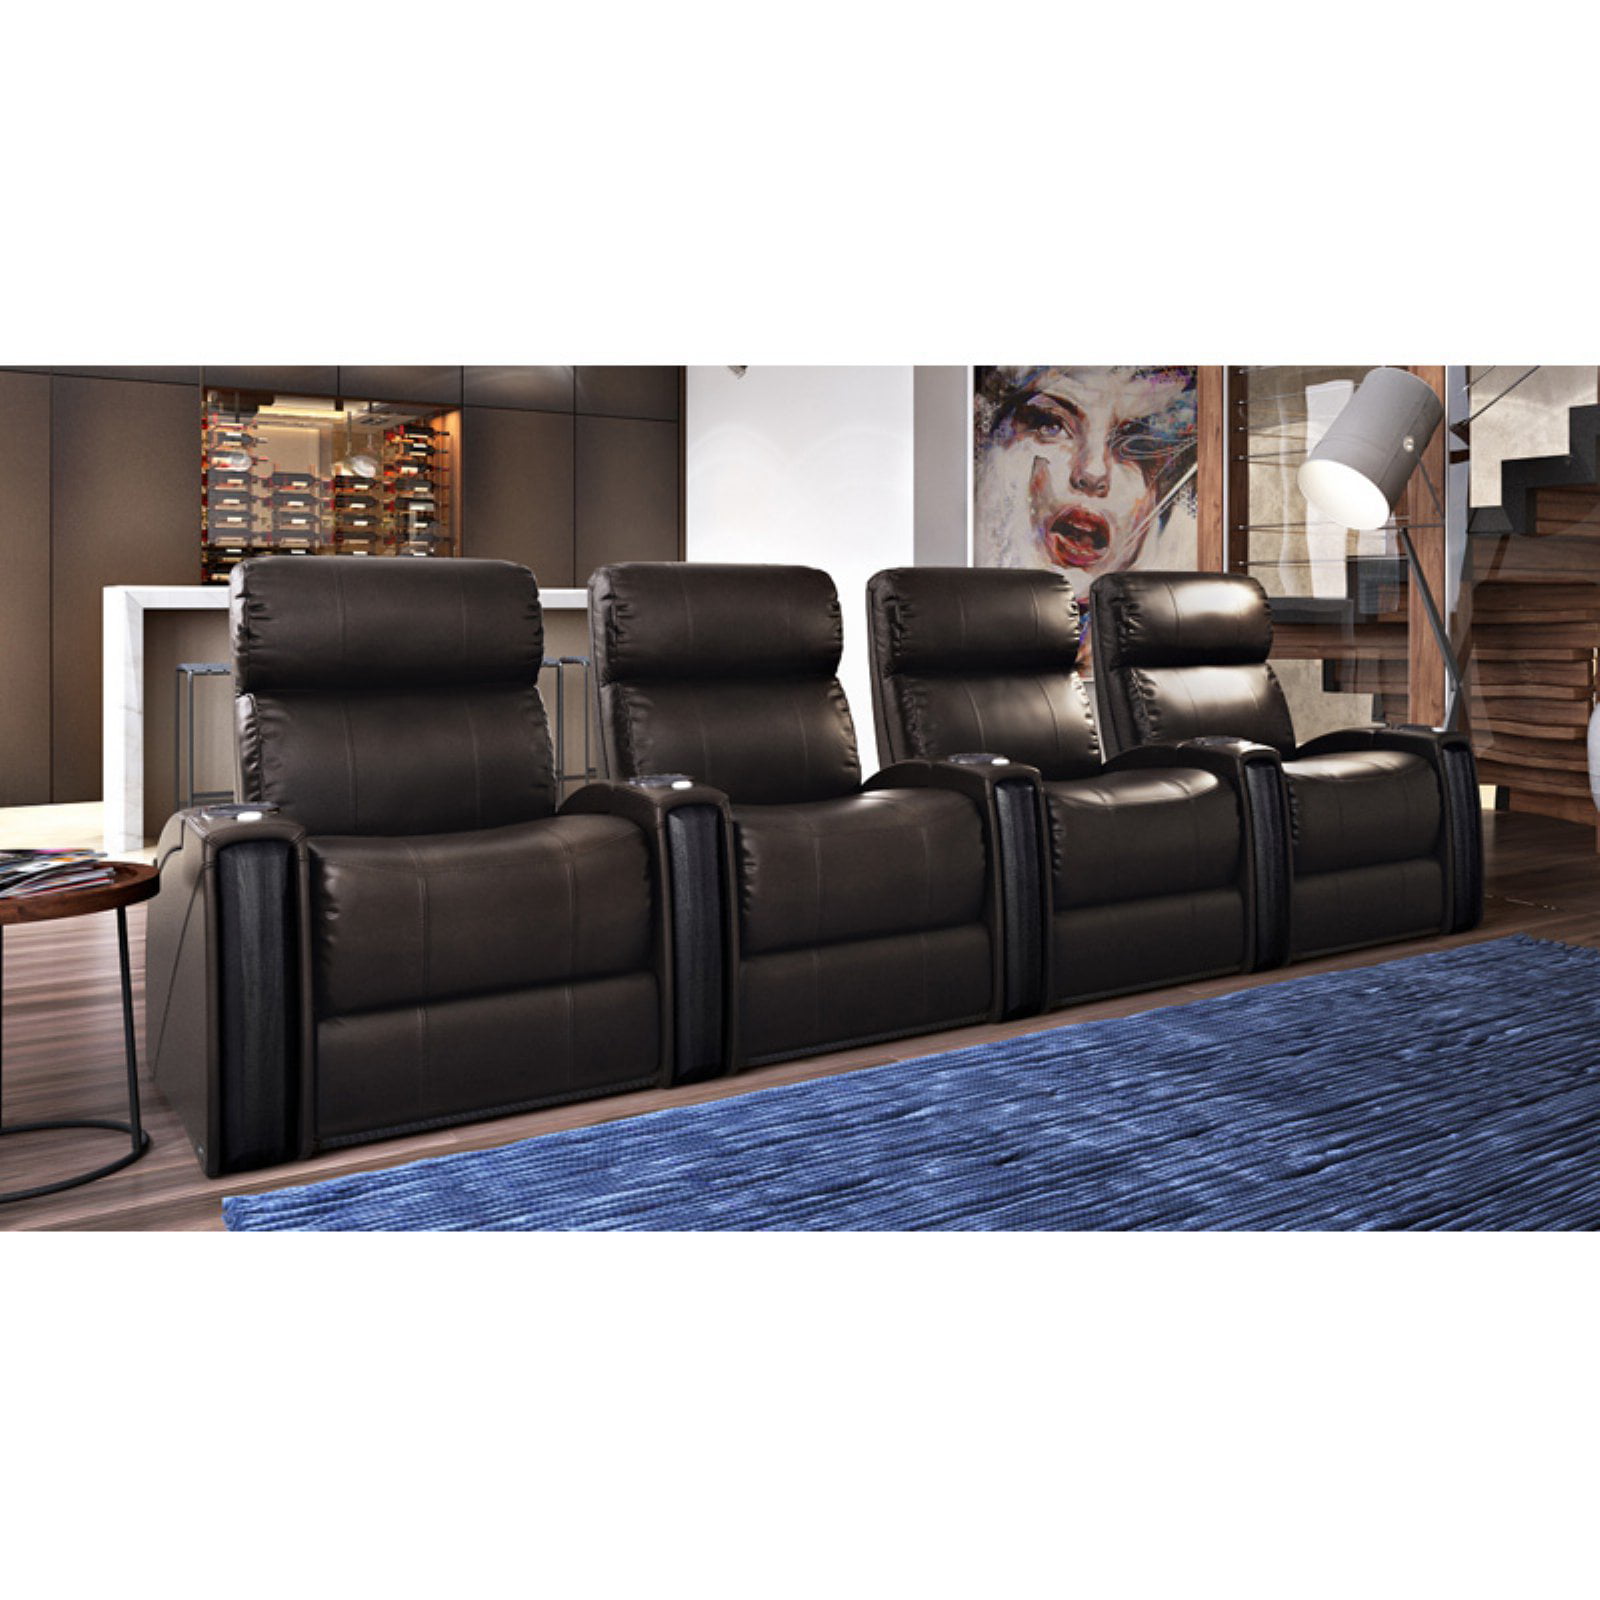 Storage Arms Brown Top Grain Leather Lights Row 4 Chairs Octane Seating Nitro XL750 Home Theater Room Furniture Power Recline